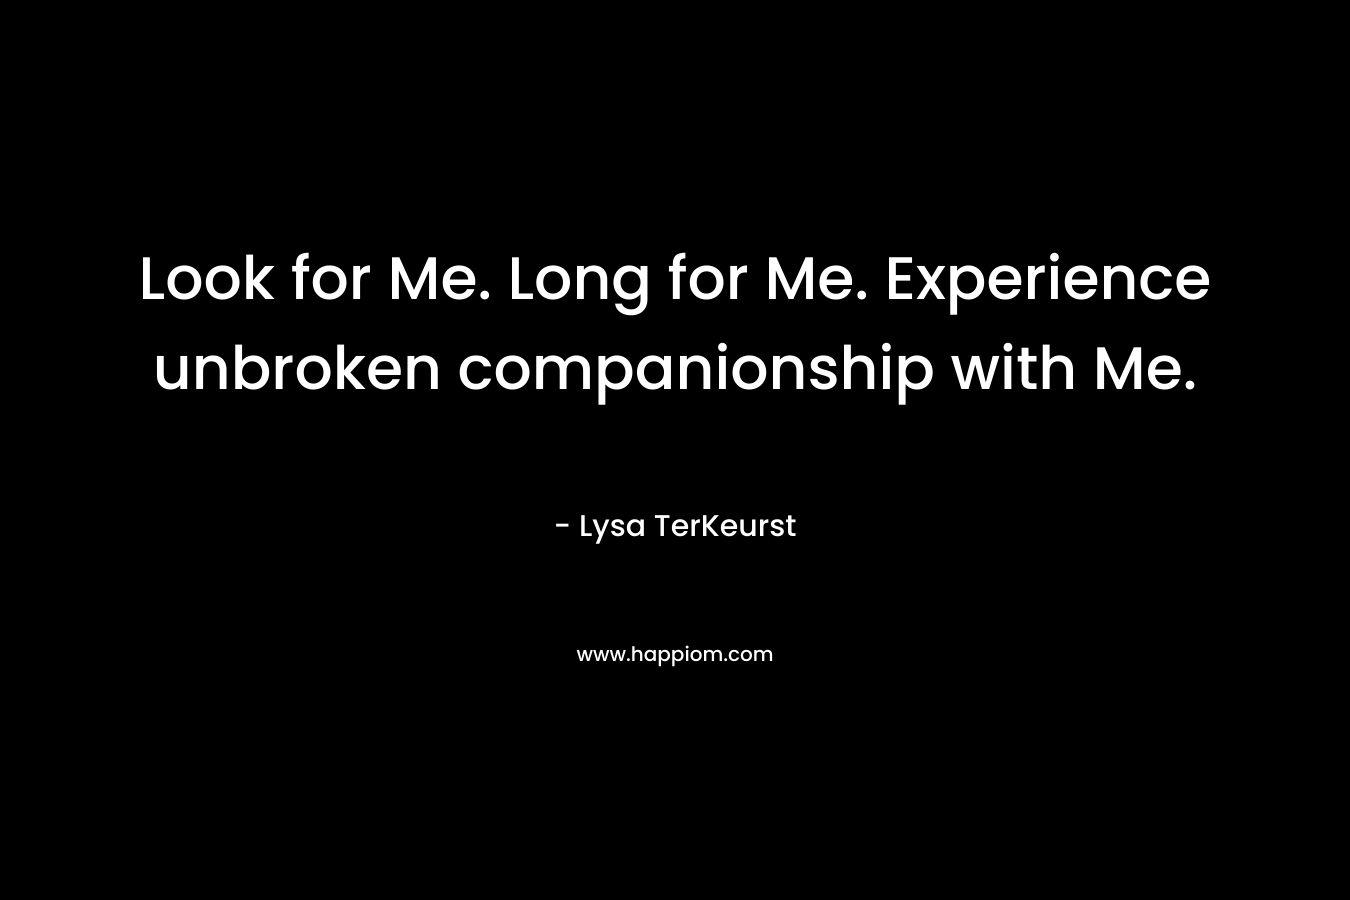 Look for Me. Long for Me. Experience unbroken companionship with Me.